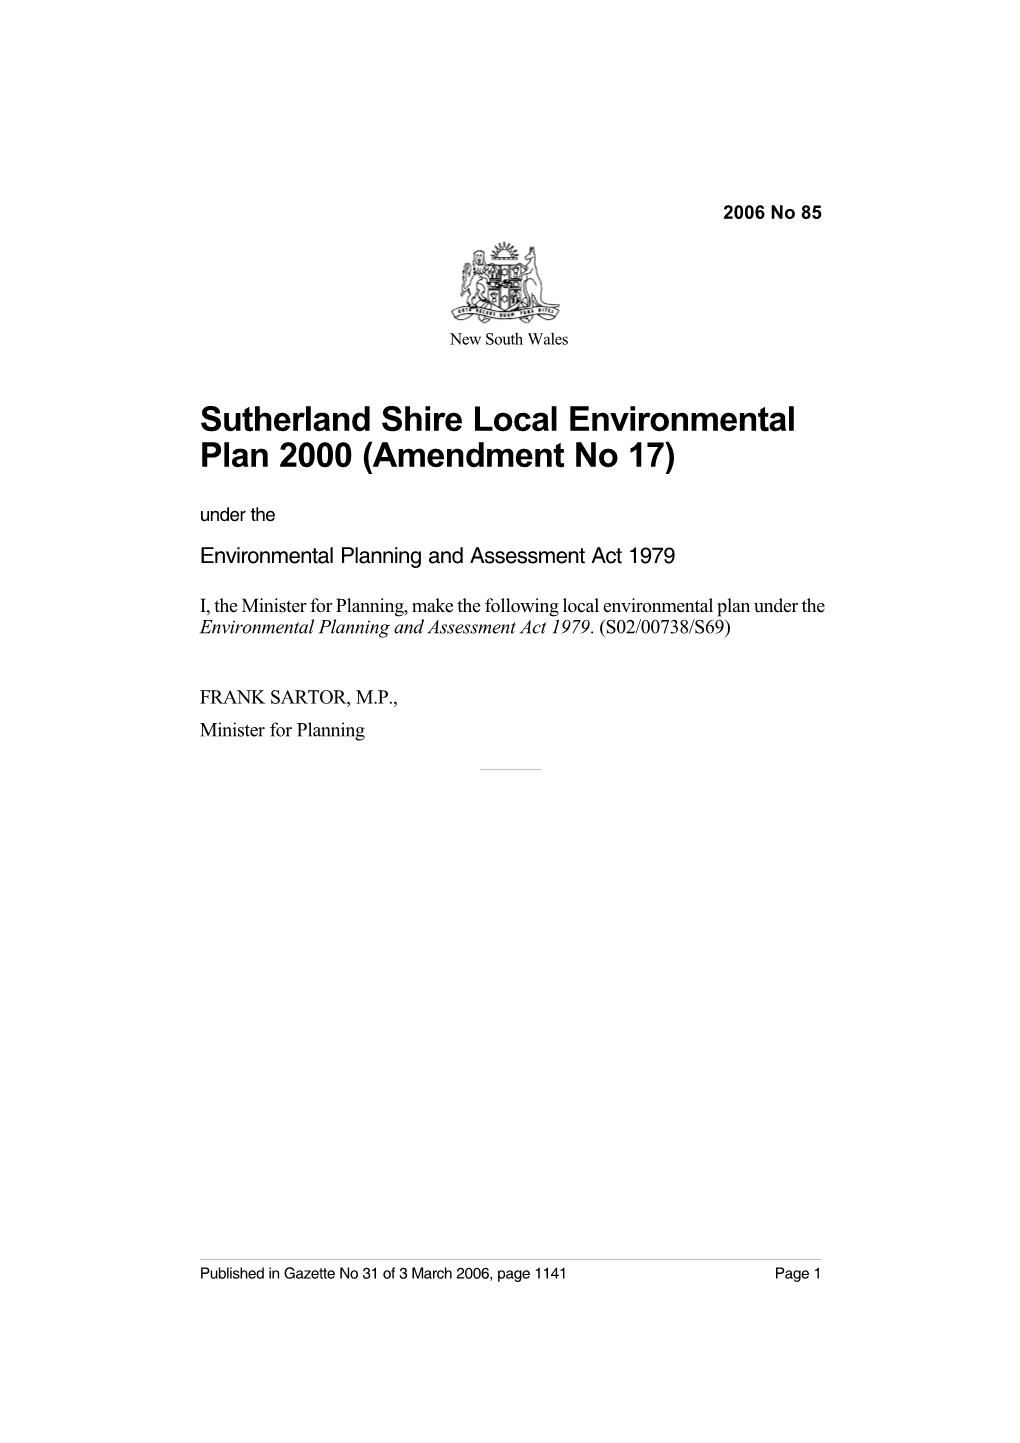 Sutherland Shire Local Environmental Plan 2000 (Amendment No 17) Under the Environmental Planning and Assessment Act 1979